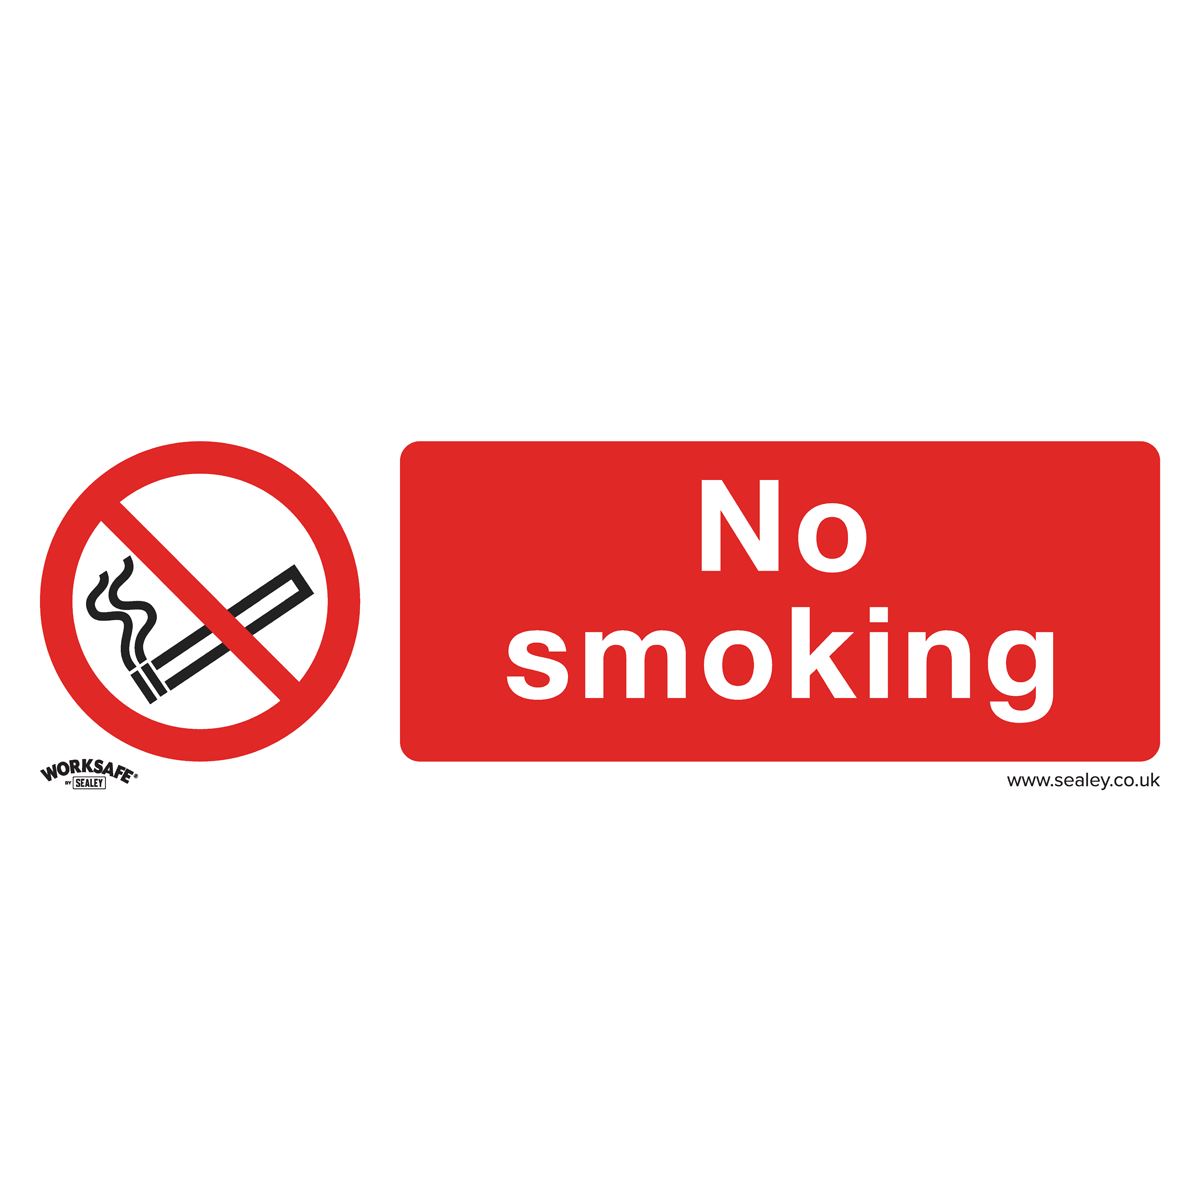 Worksafe by Sealey Prohibition Safety Sign - No Smoking - Self-Adhesive Vinyl